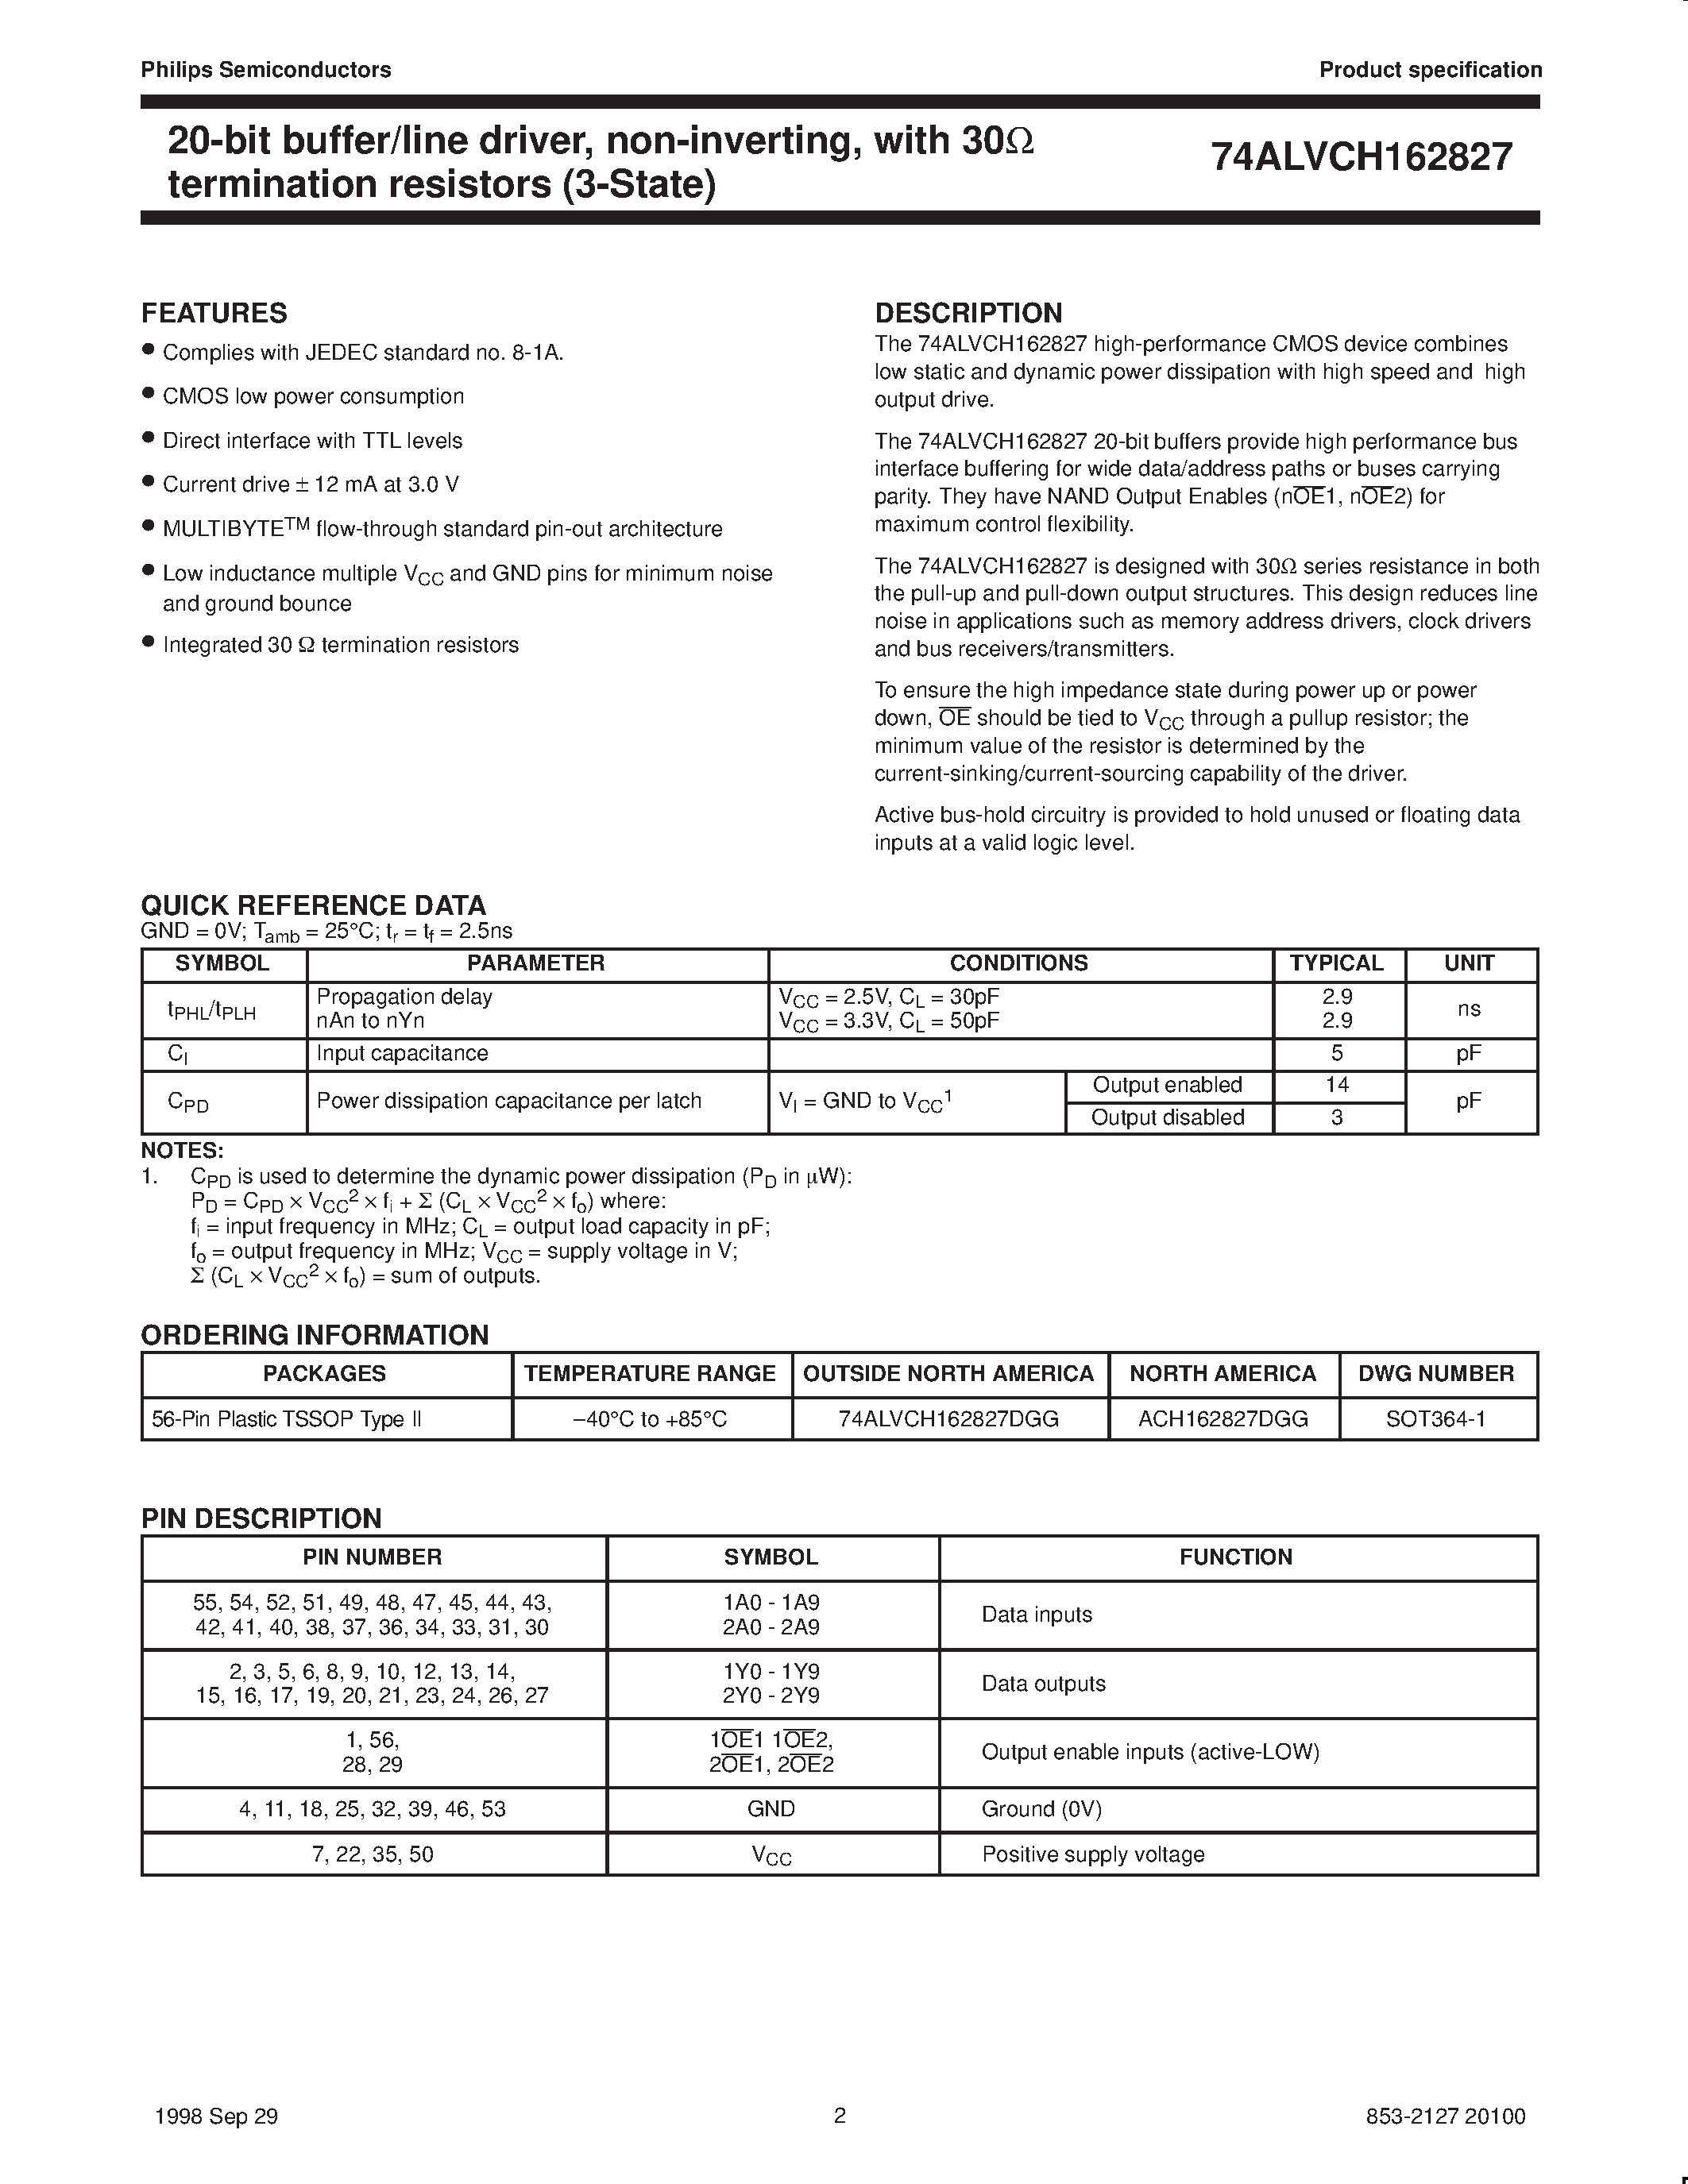 Datasheet 74ALVCH162827 - 20-bit buffer/line driver/ non-inverting/with 30ohm termination resistors (3-State) page 2